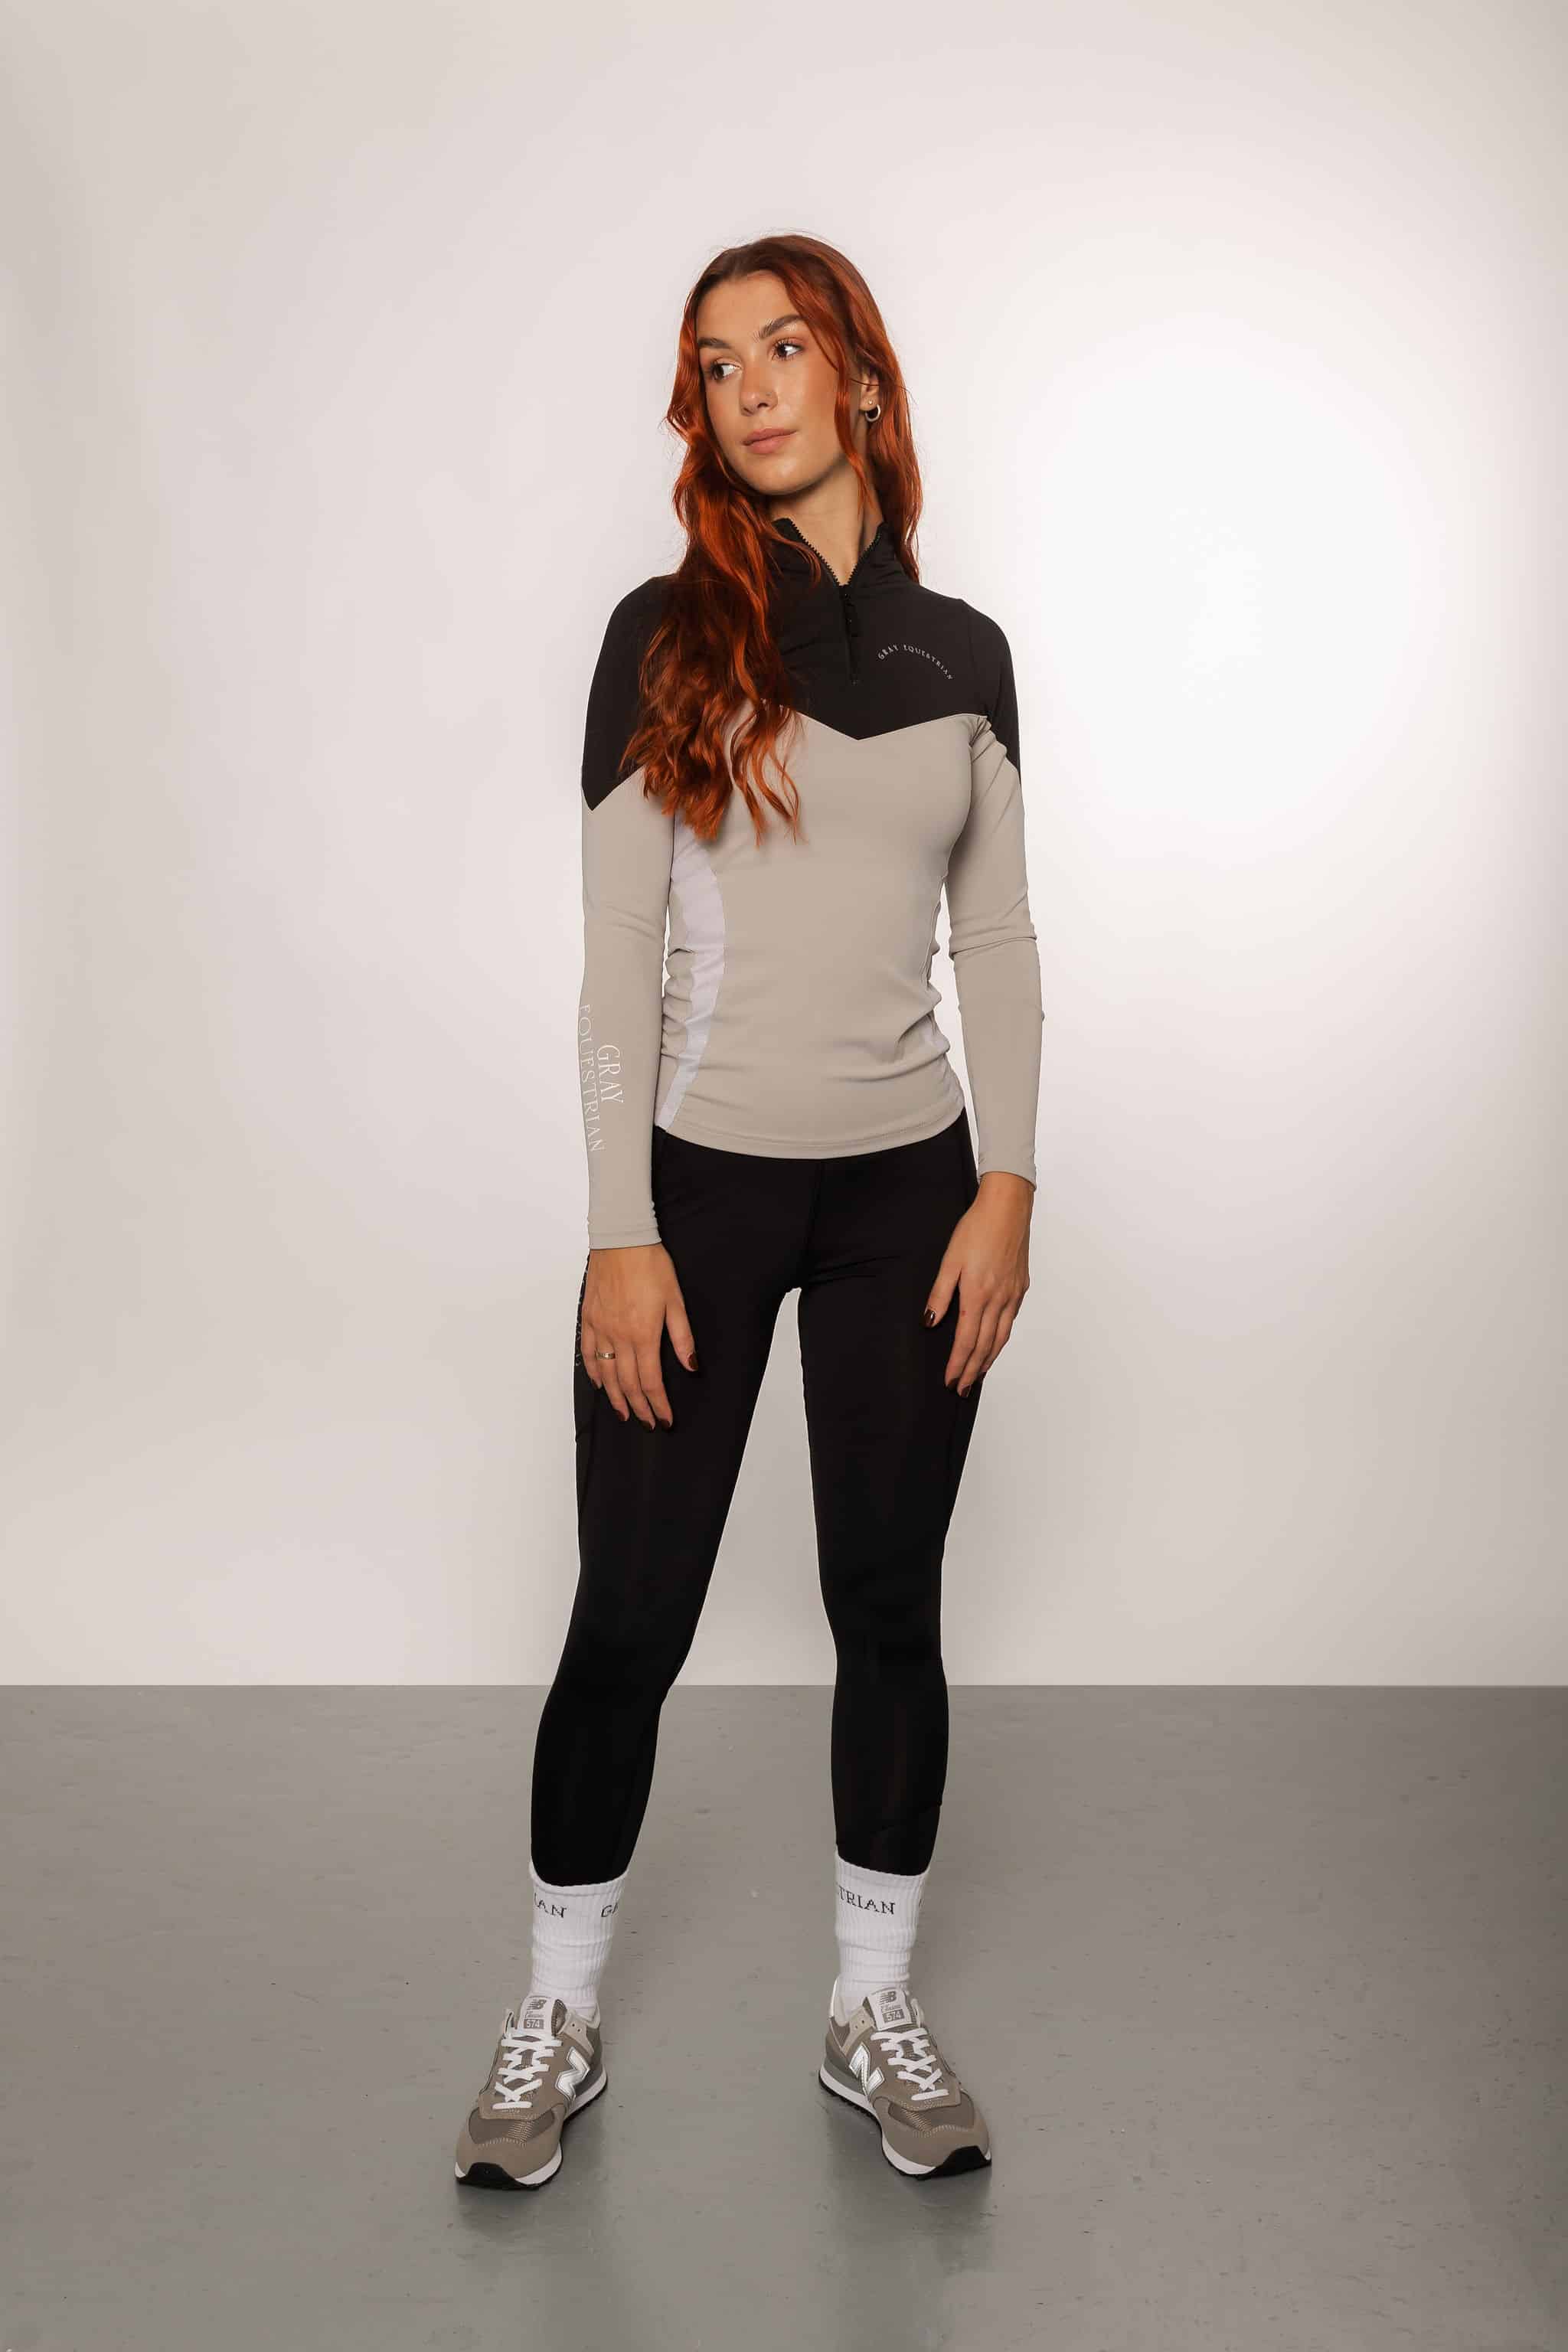 Red haired model wearing our long-sleeved black and grey two toned base layer and black equestrian leggings.